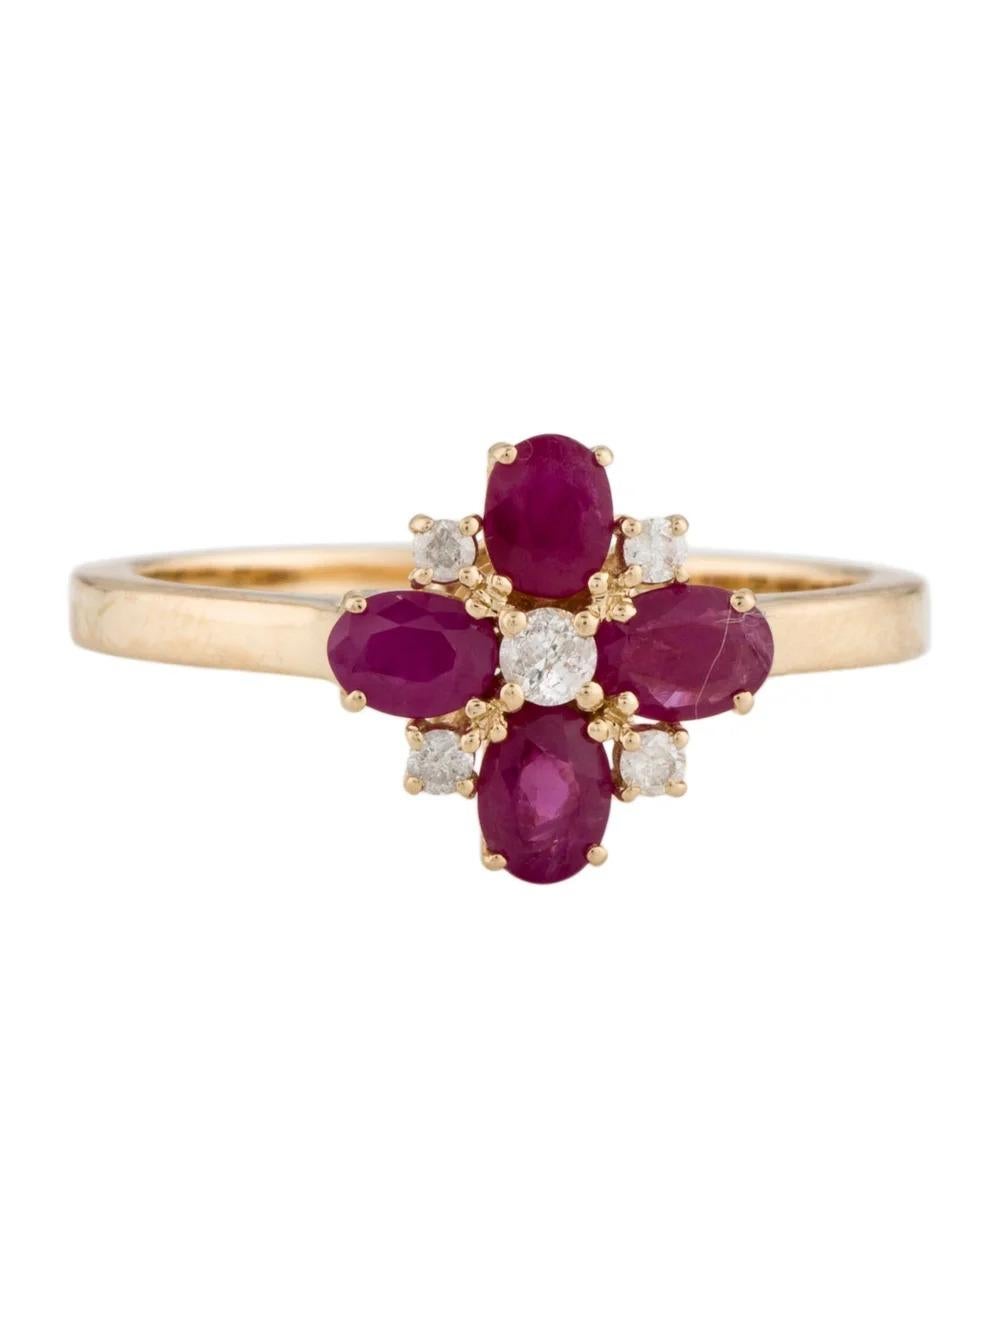 Mixed Cut 14K Ruby & Diamond Cocktail Ring, Size 6.75 - Stunning Design, Statement Jewelry For Sale